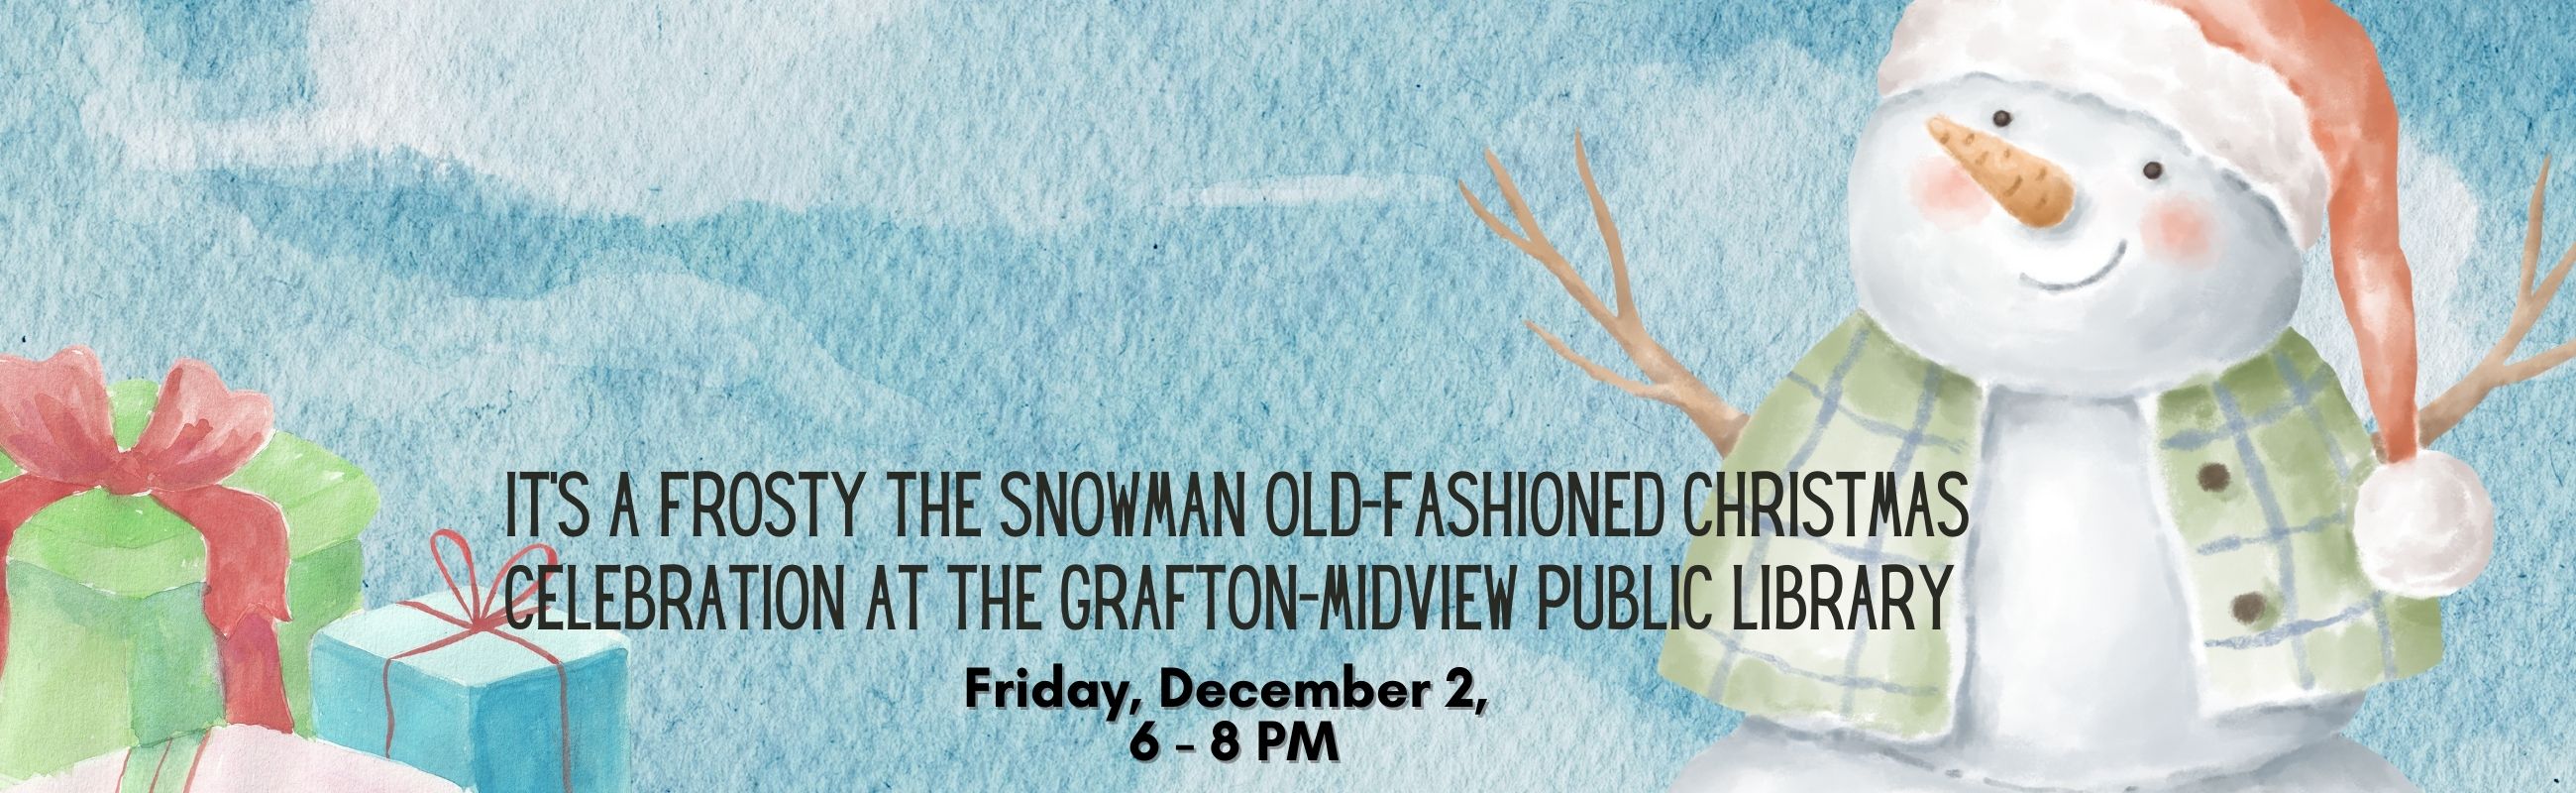 Don't forget to visit the Library during Old-Fashioned Christmas on Friday, December 2 from 6 - 8 PM